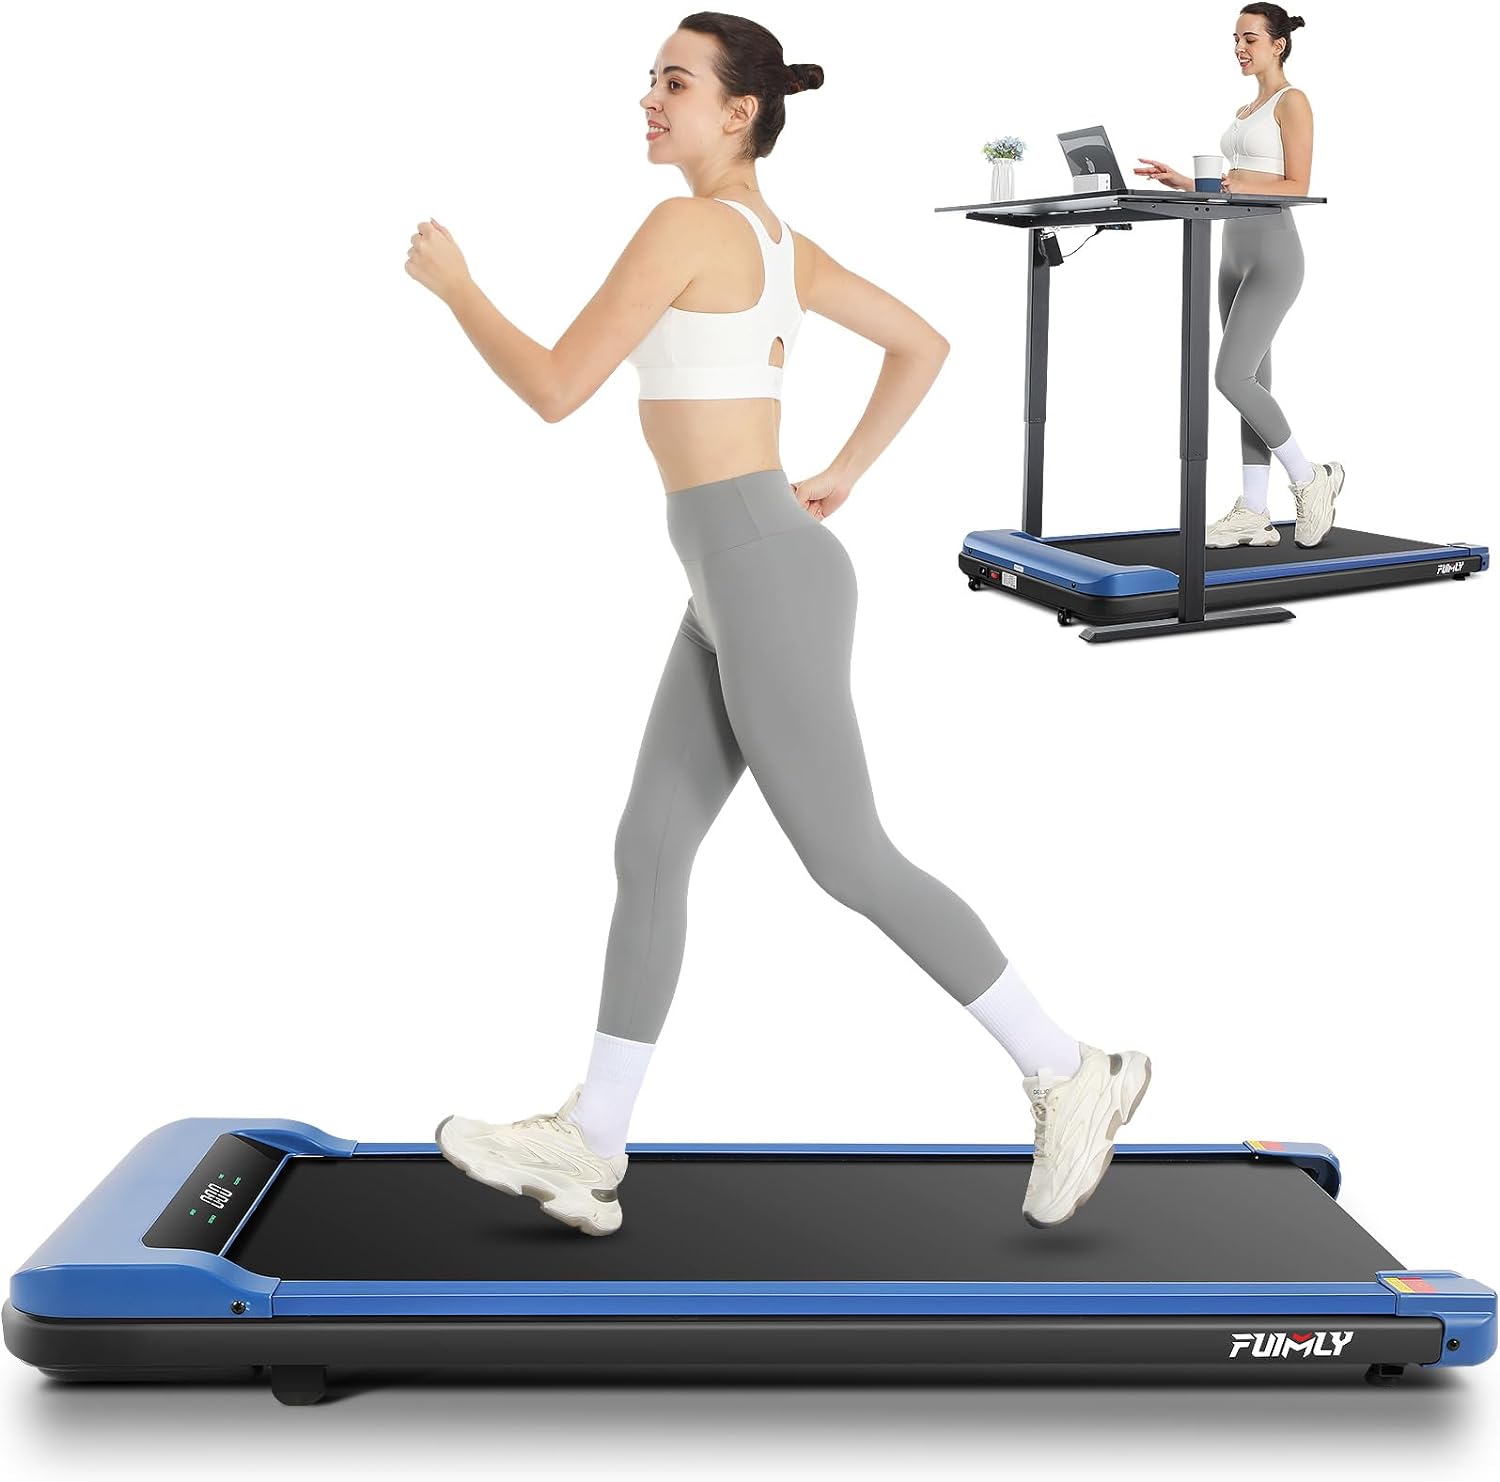 funmily 2 in 1 Under Desk Treadmill w/Remote Control&LED Display,2.5HP Home Office Electric Walking Pad Treadmill,265LB Weight Capacity